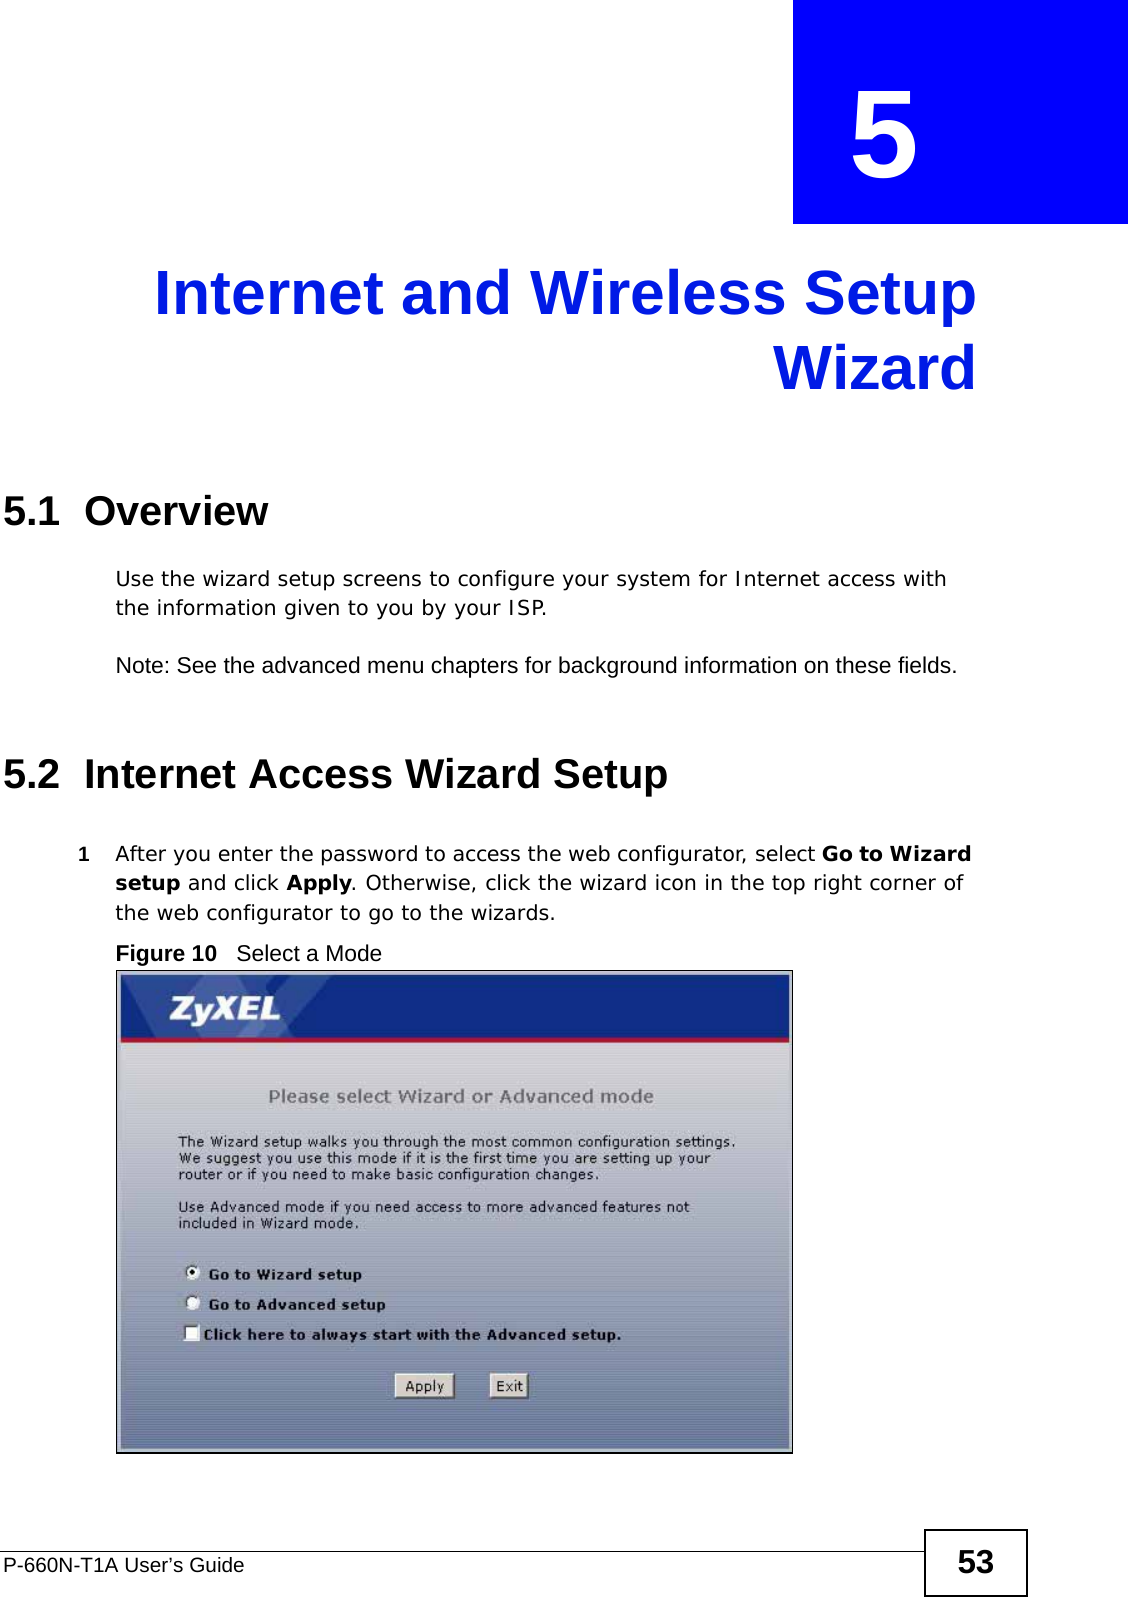 P-660N-T1A User’s Guide 53CHAPTER  5 Internet and Wireless SetupWizard5.1  OverviewUse the wizard setup screens to configure your system for Internet access with the information given to you by your ISP. Note: See the advanced menu chapters for background information on these fields.5.2  Internet Access Wizard Setup1After you enter the password to access the web configurator, select Go to Wizard setup and click Apply. Otherwise, click the wizard icon in the top right corner of the web configurator to go to the wizards. Figure 10   Select a Mode